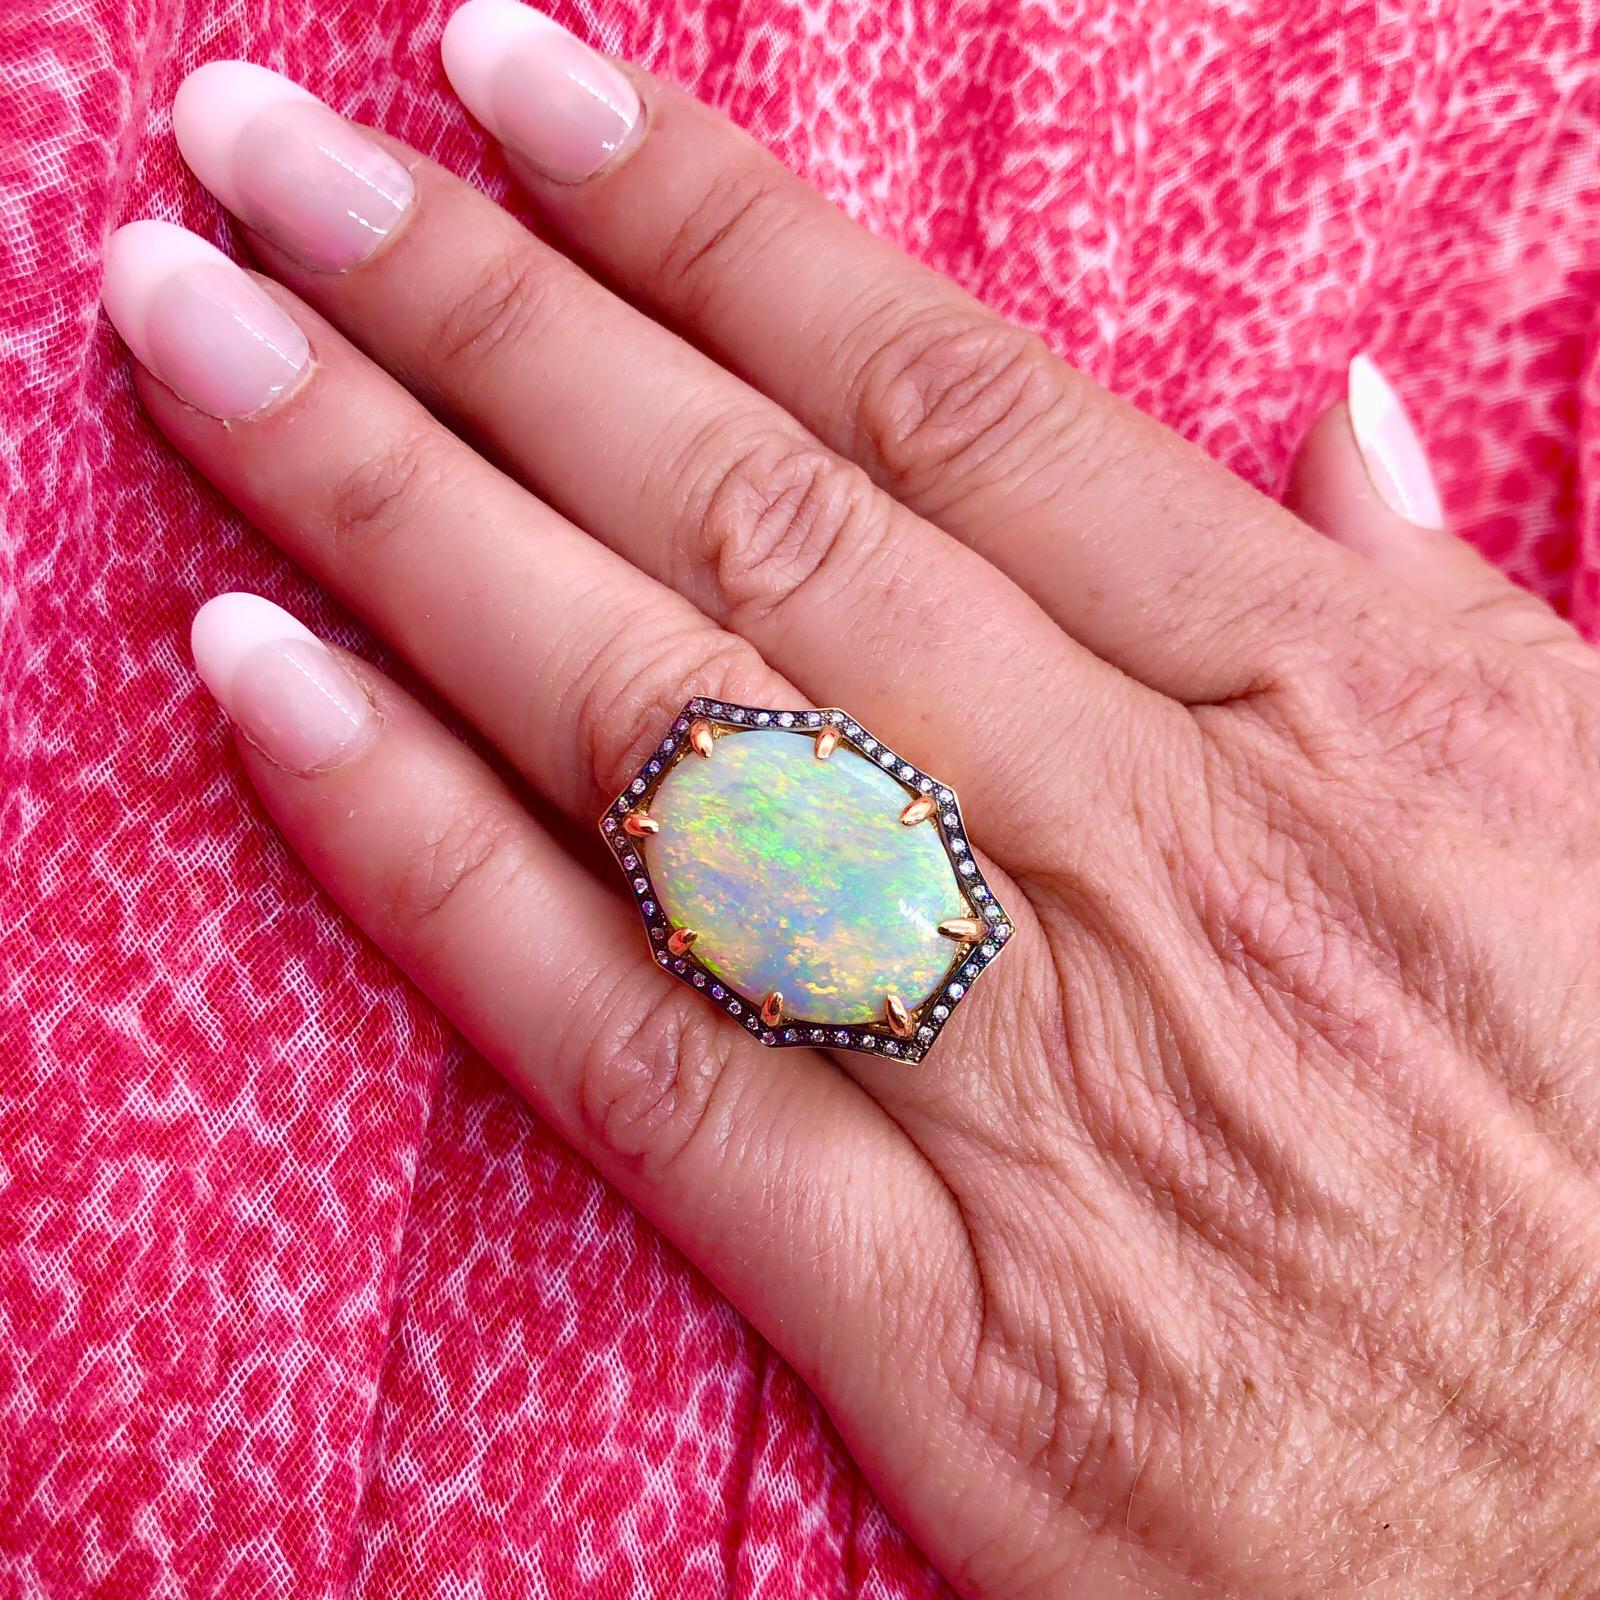 Exceptional Custom 11.00 Carat Australian Opal Set in 18Kt Rose Gold with a Halo of 48 Round Cut Diamonds. Opal has incredible play of color and beautiful vibrancy. The ring is a size 7.25 and weighs 14.4 grams. The perfect statement piece!